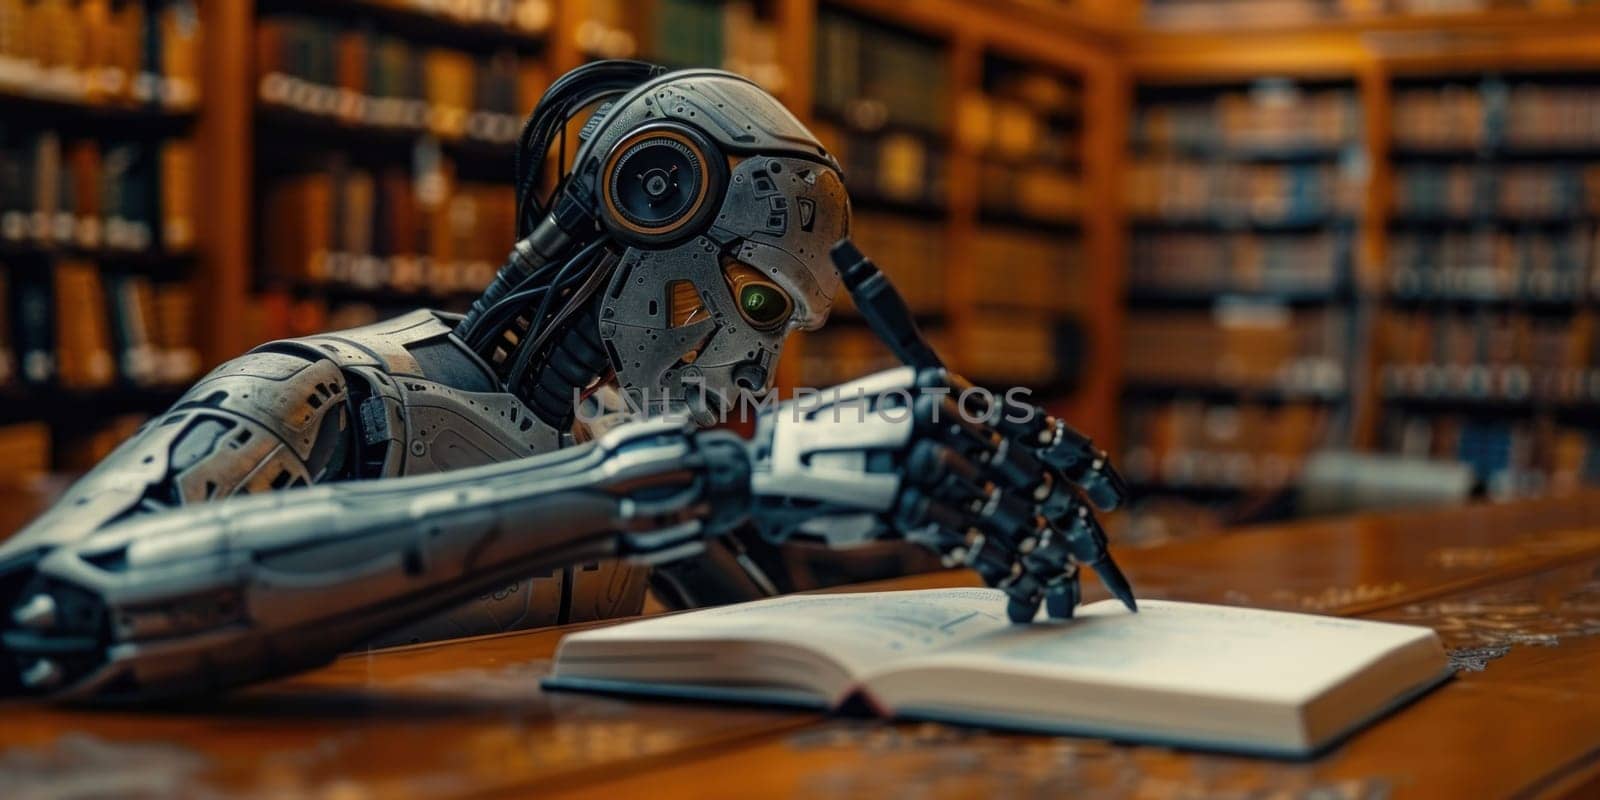 A robot in a library, reading a book attentively.